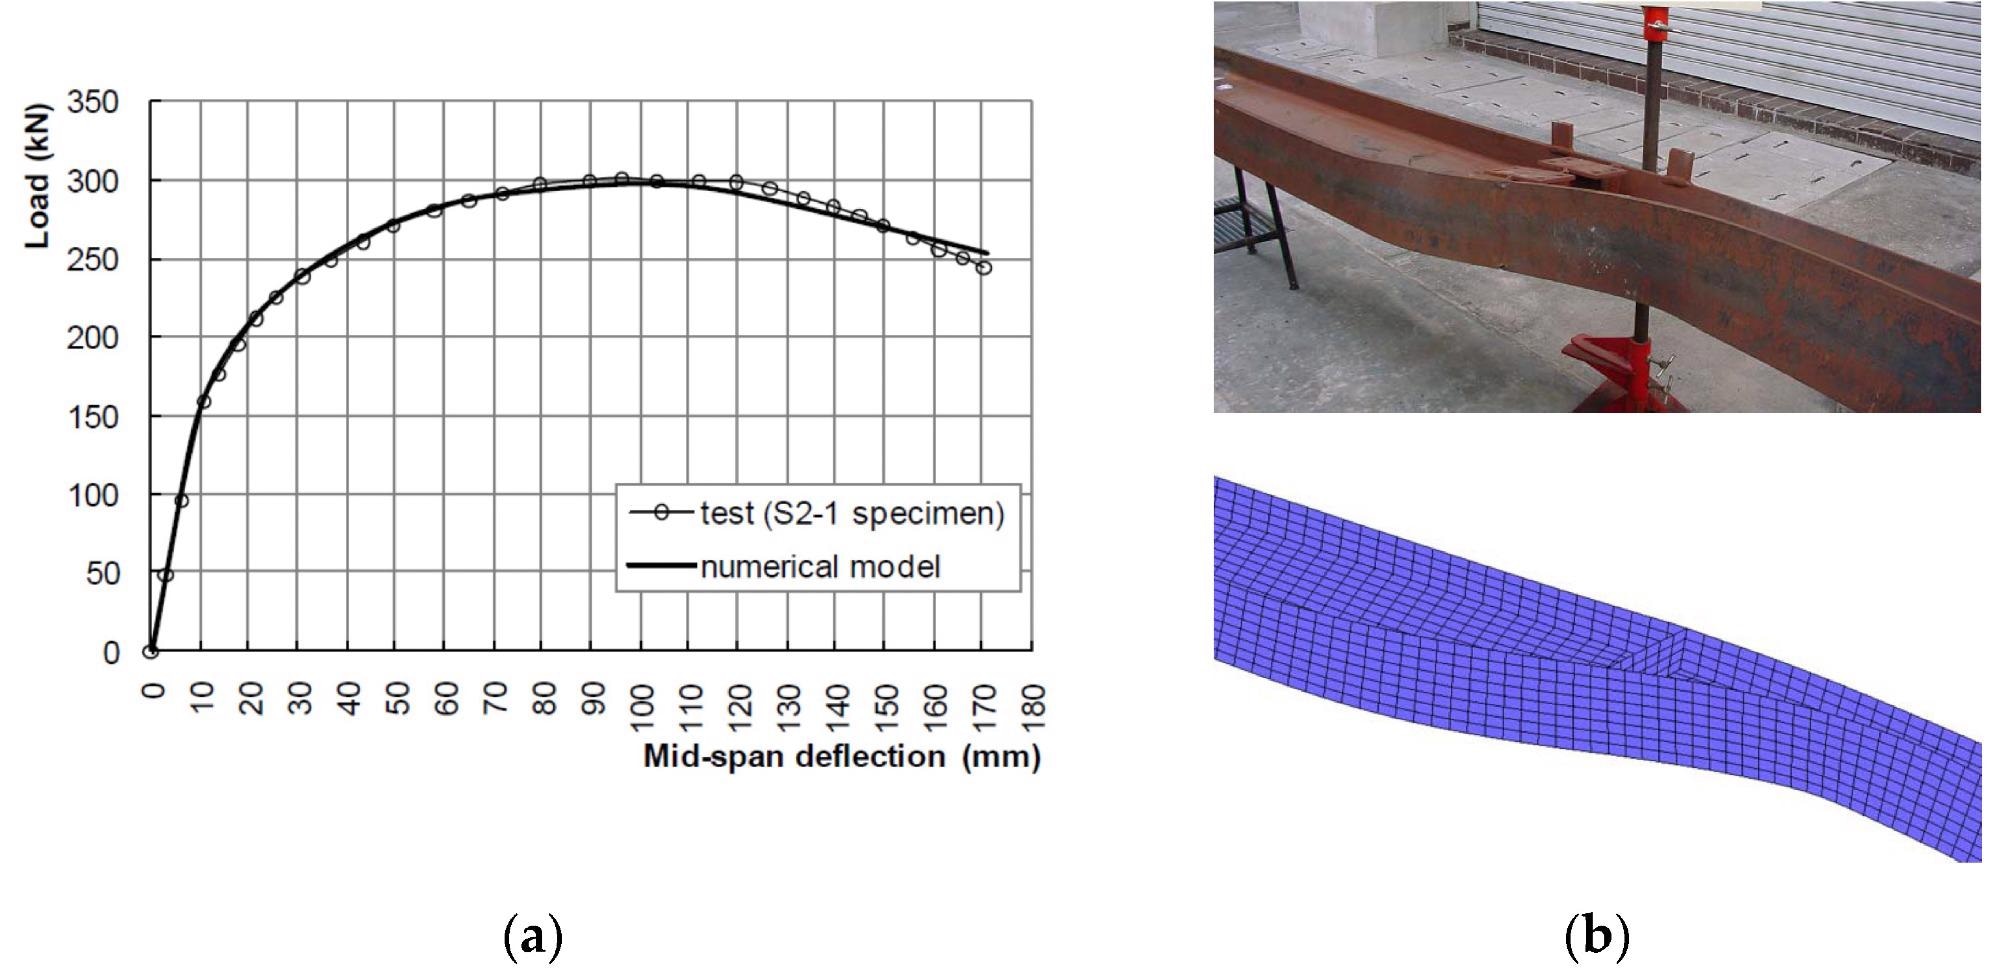 (a) Comparison of the numerical analysis results with the test results for the specimen S2-1 at 415 °C; (b) deformed shape of the steel beam at failure.